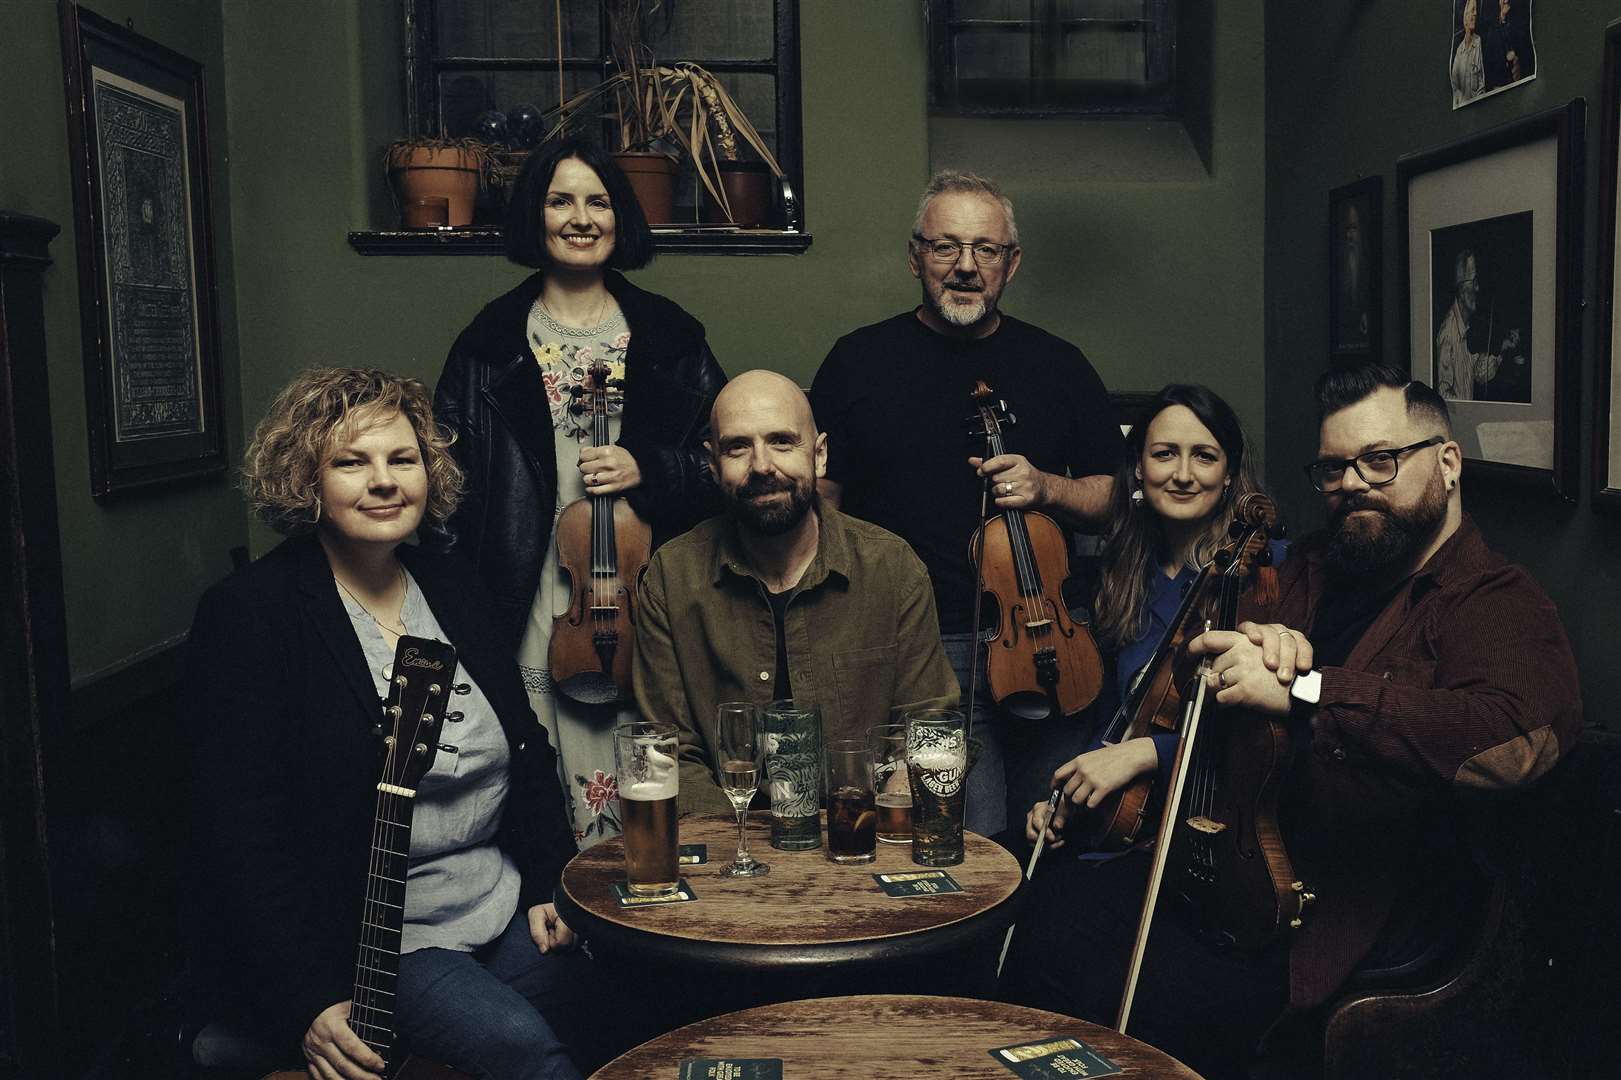 Blazin' Fiddles take to the stage on Sunday, March 10.